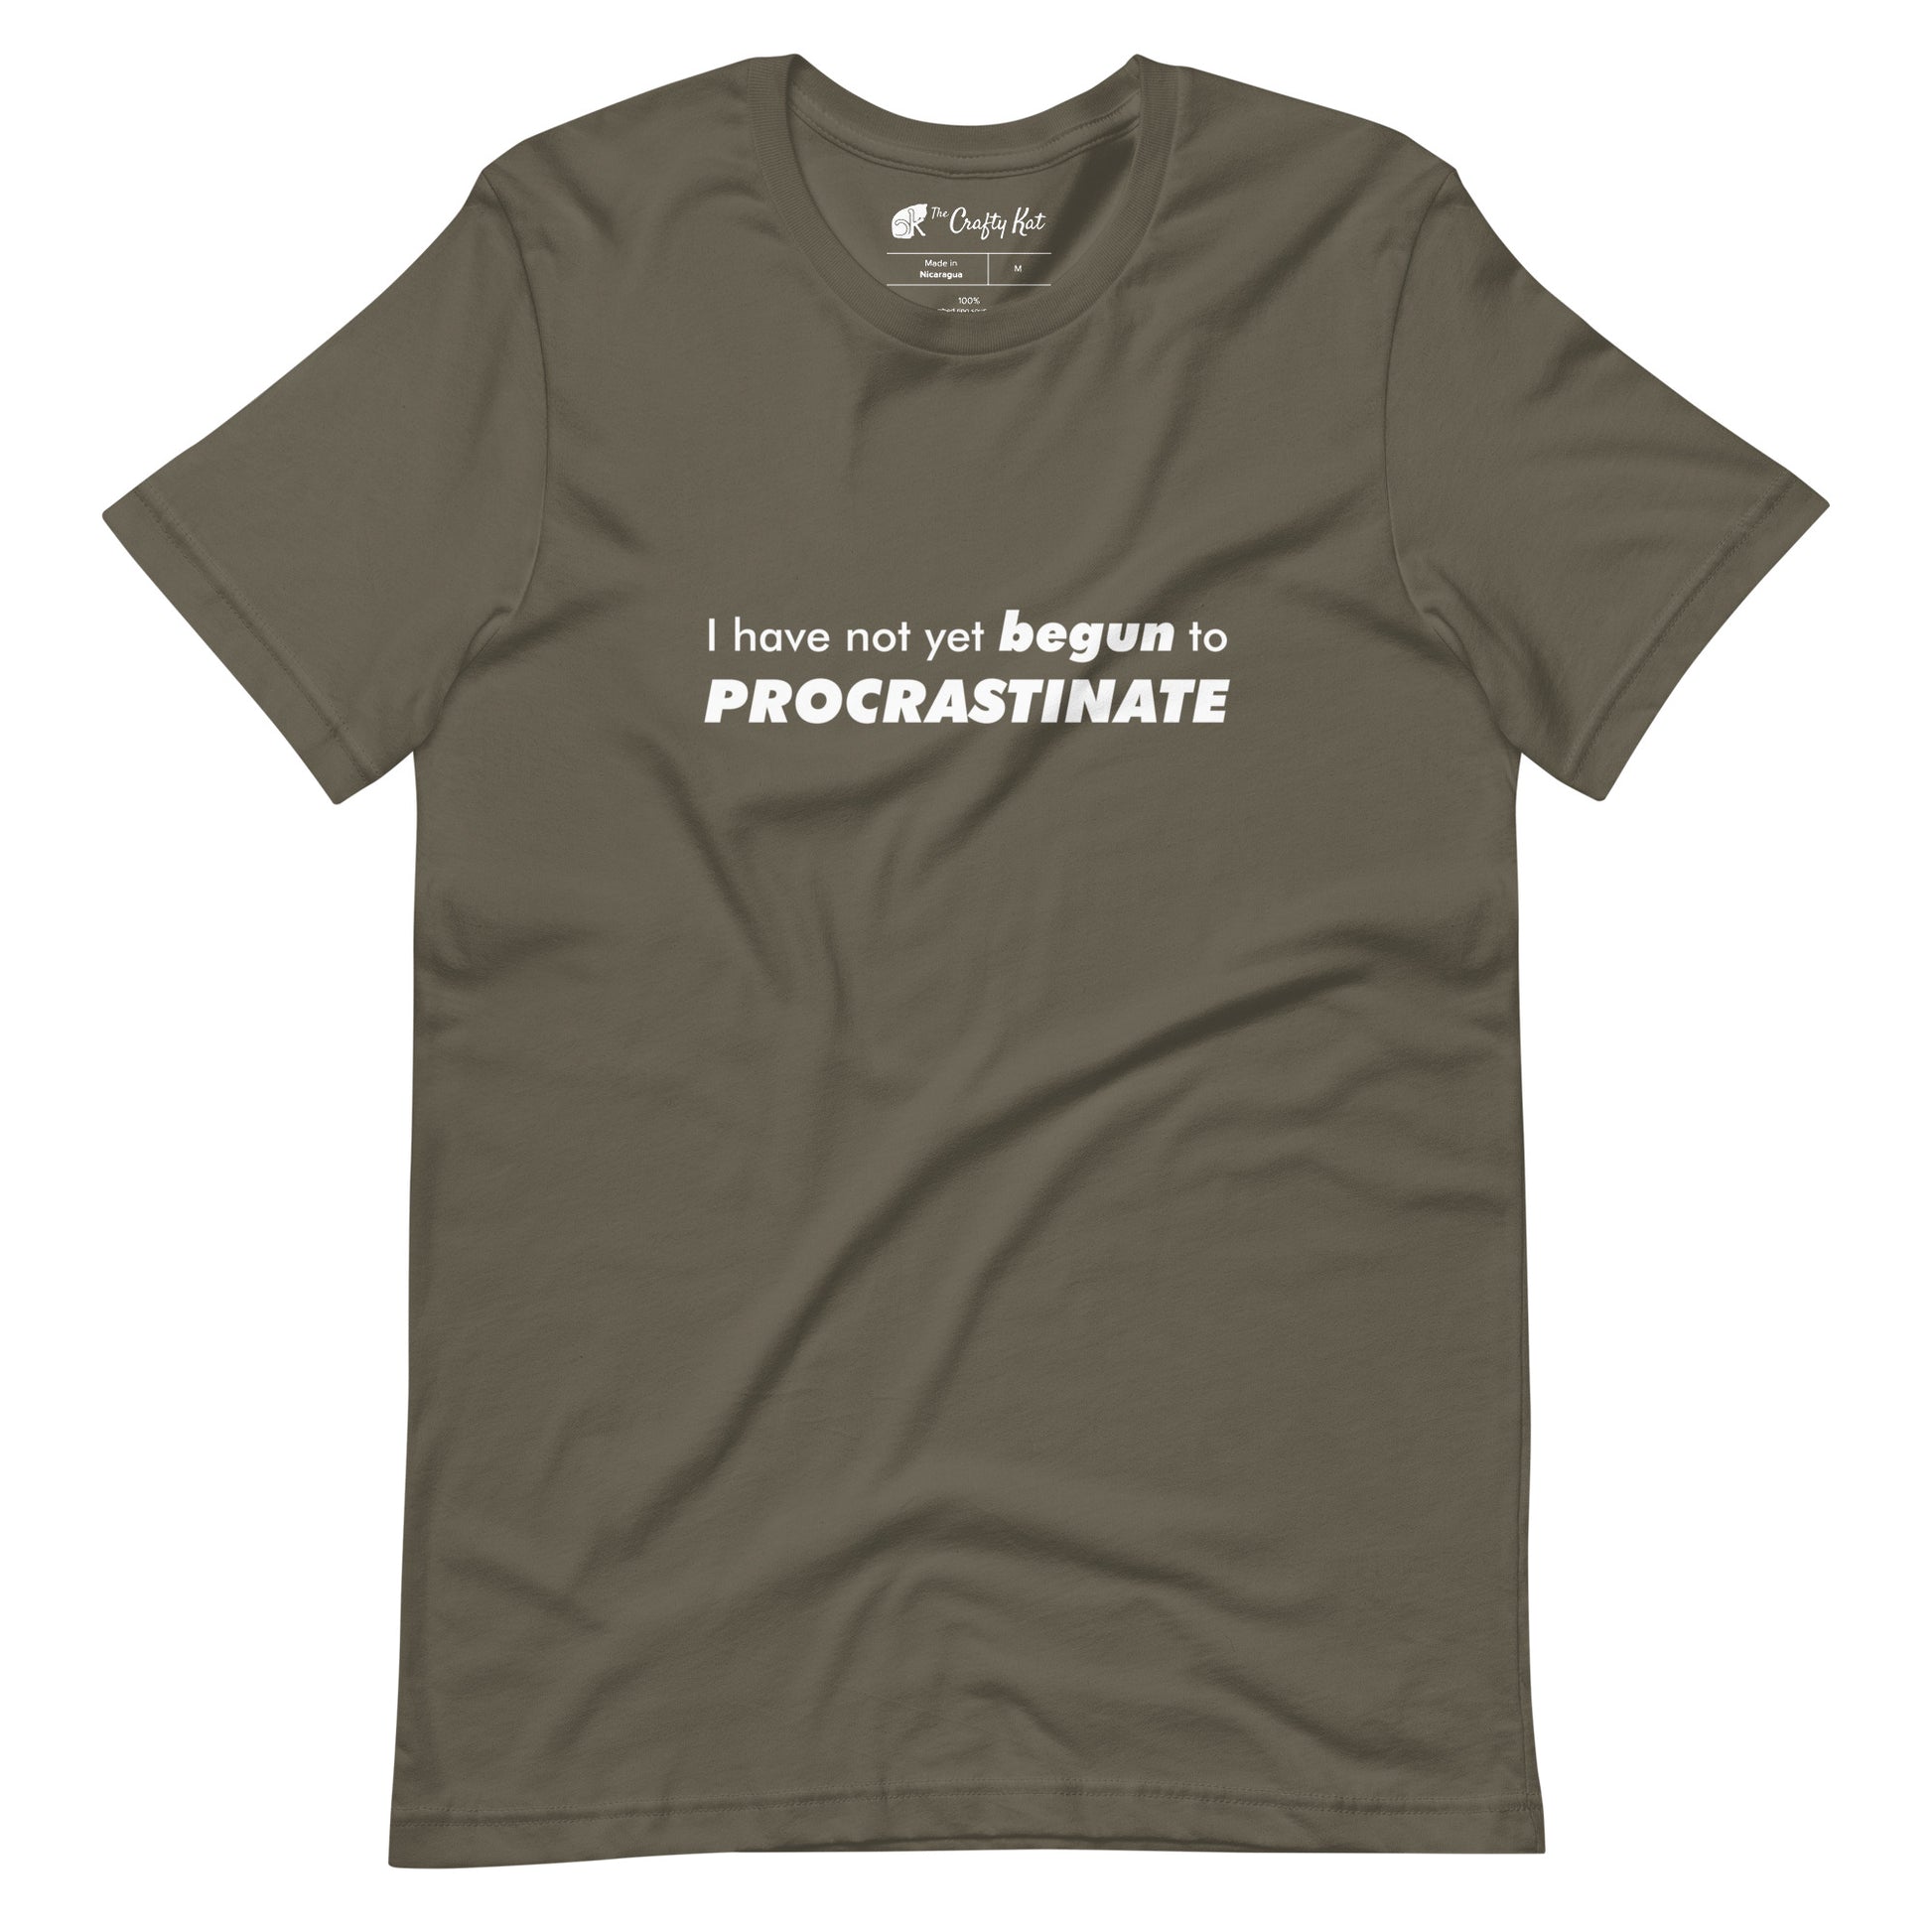 Army (olive brown) t-shirt with text graphic: "I have not yet BEGUN to PROCRASTINATE"